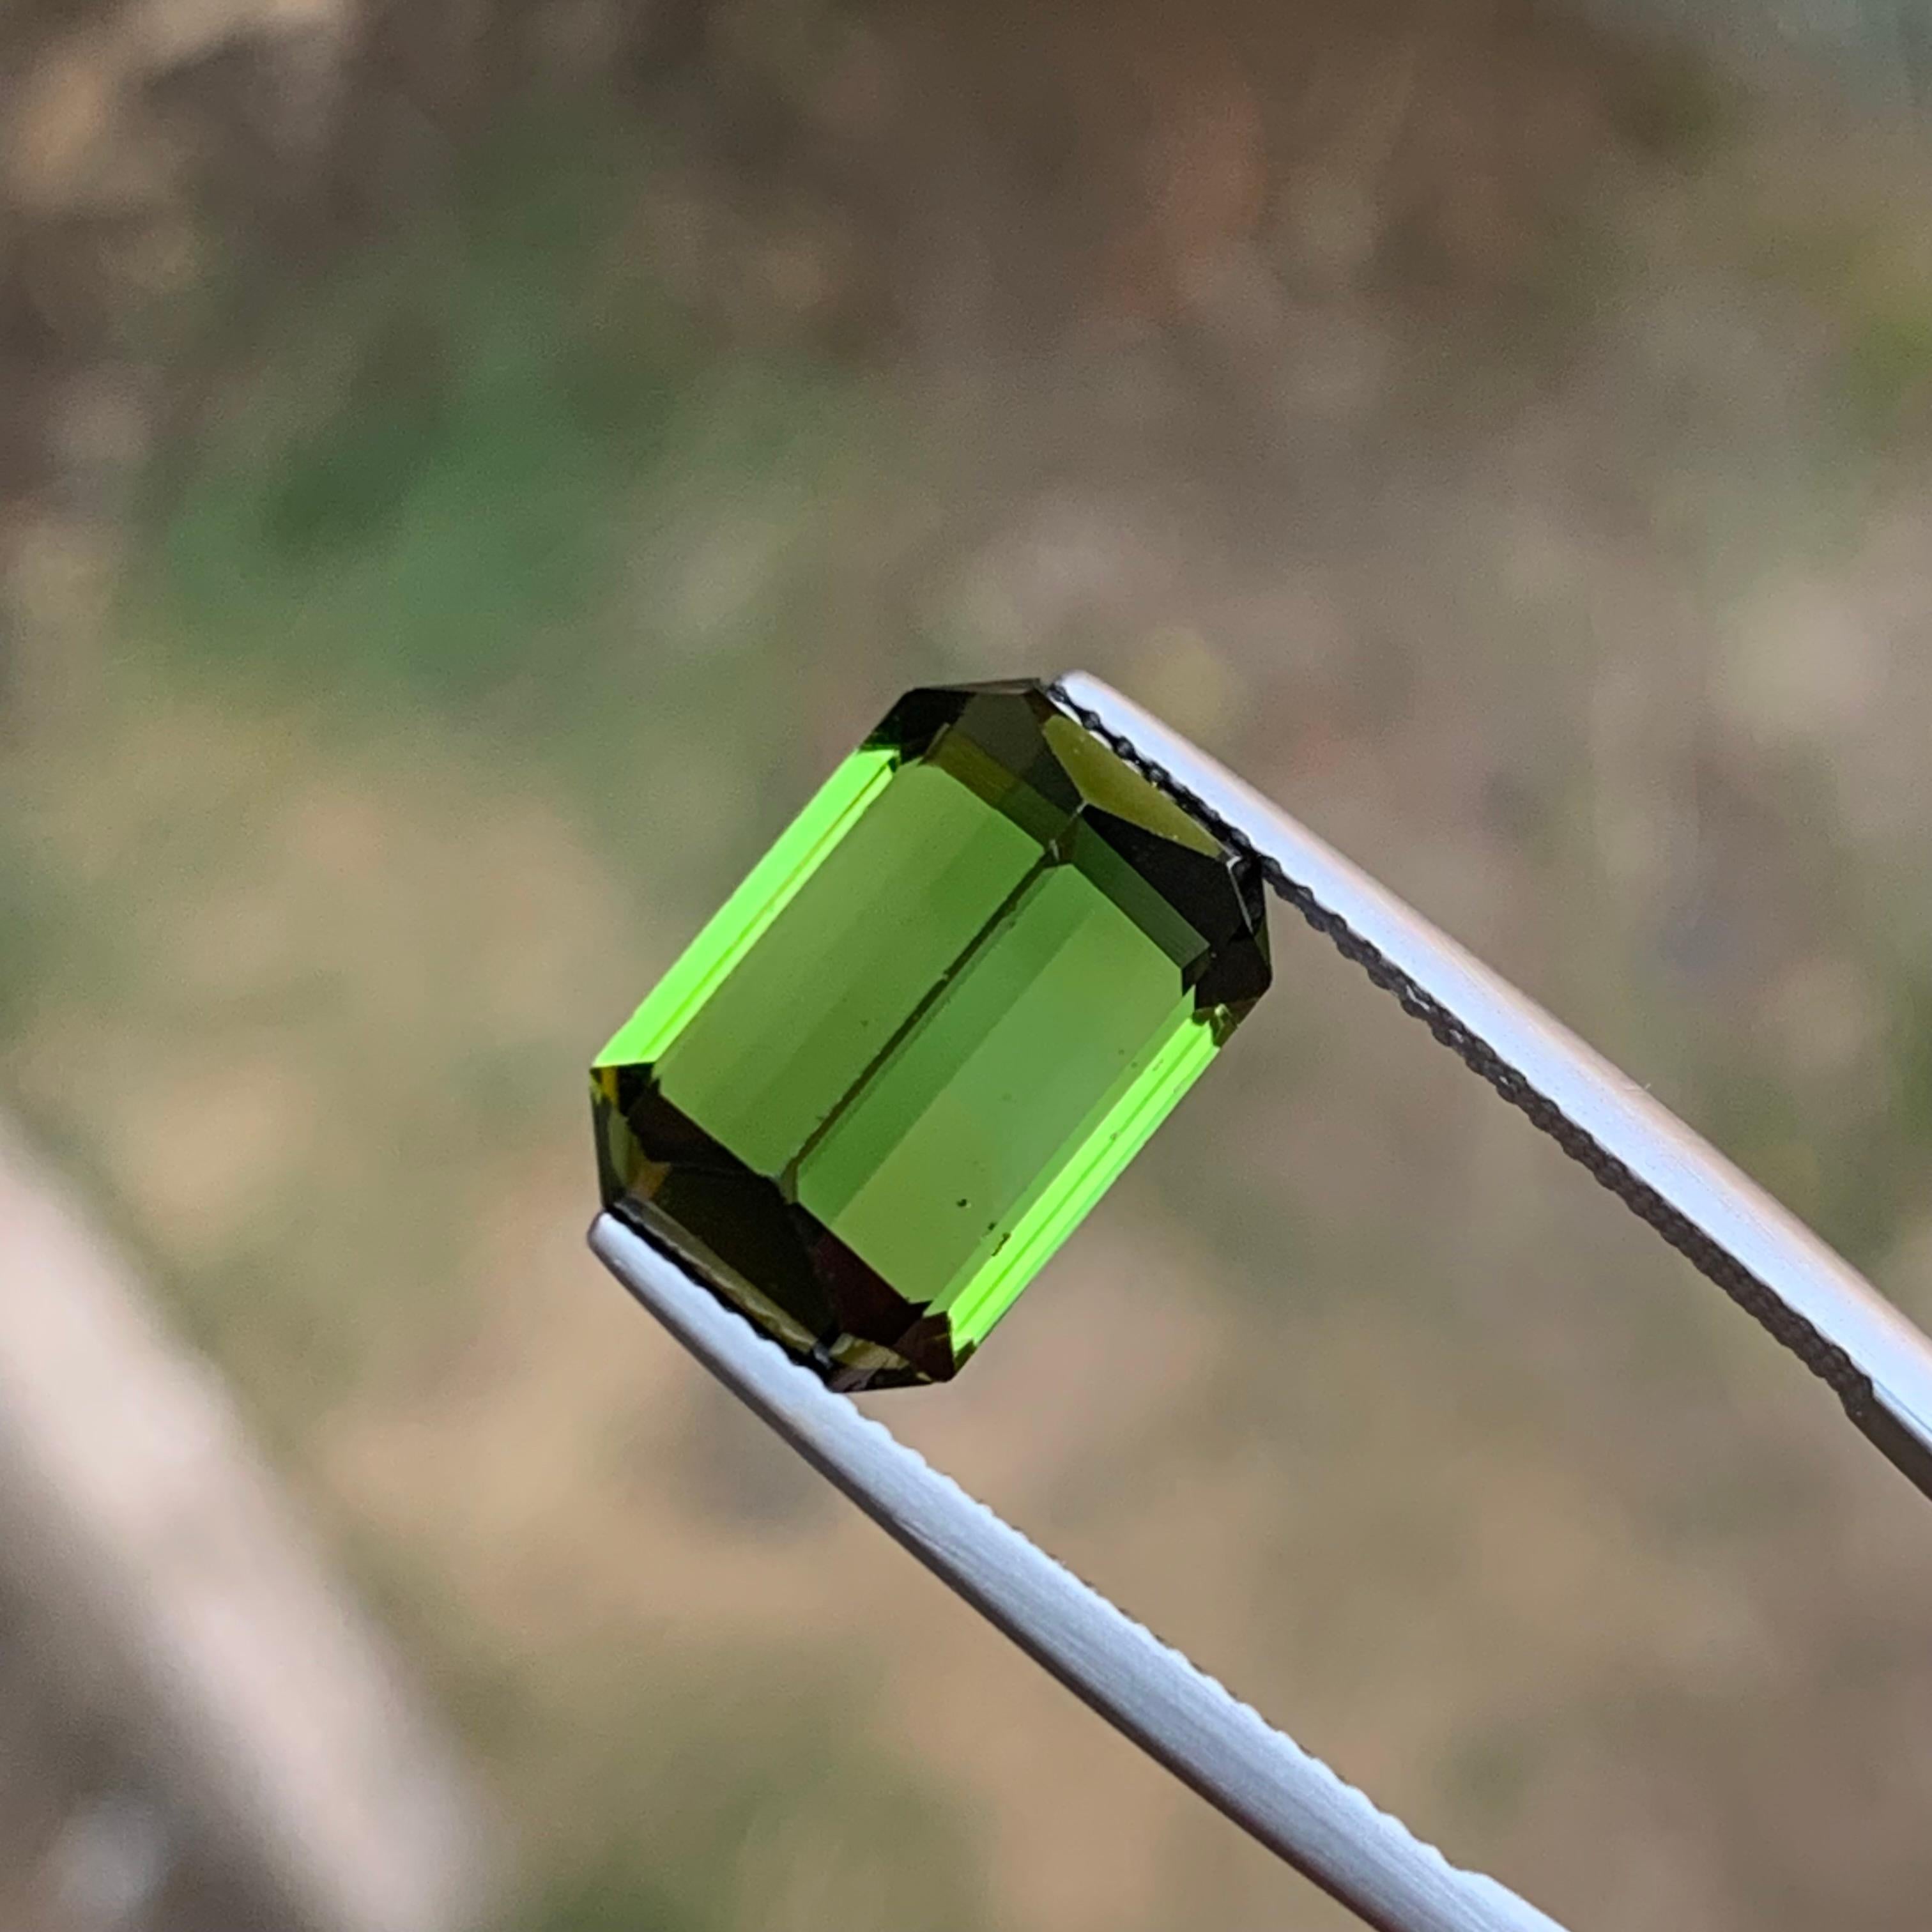 Rare Green Natural Tourmaline Loose Gemstone, 7.75 Ct-Emerald Cut Top Quality For Sale 1